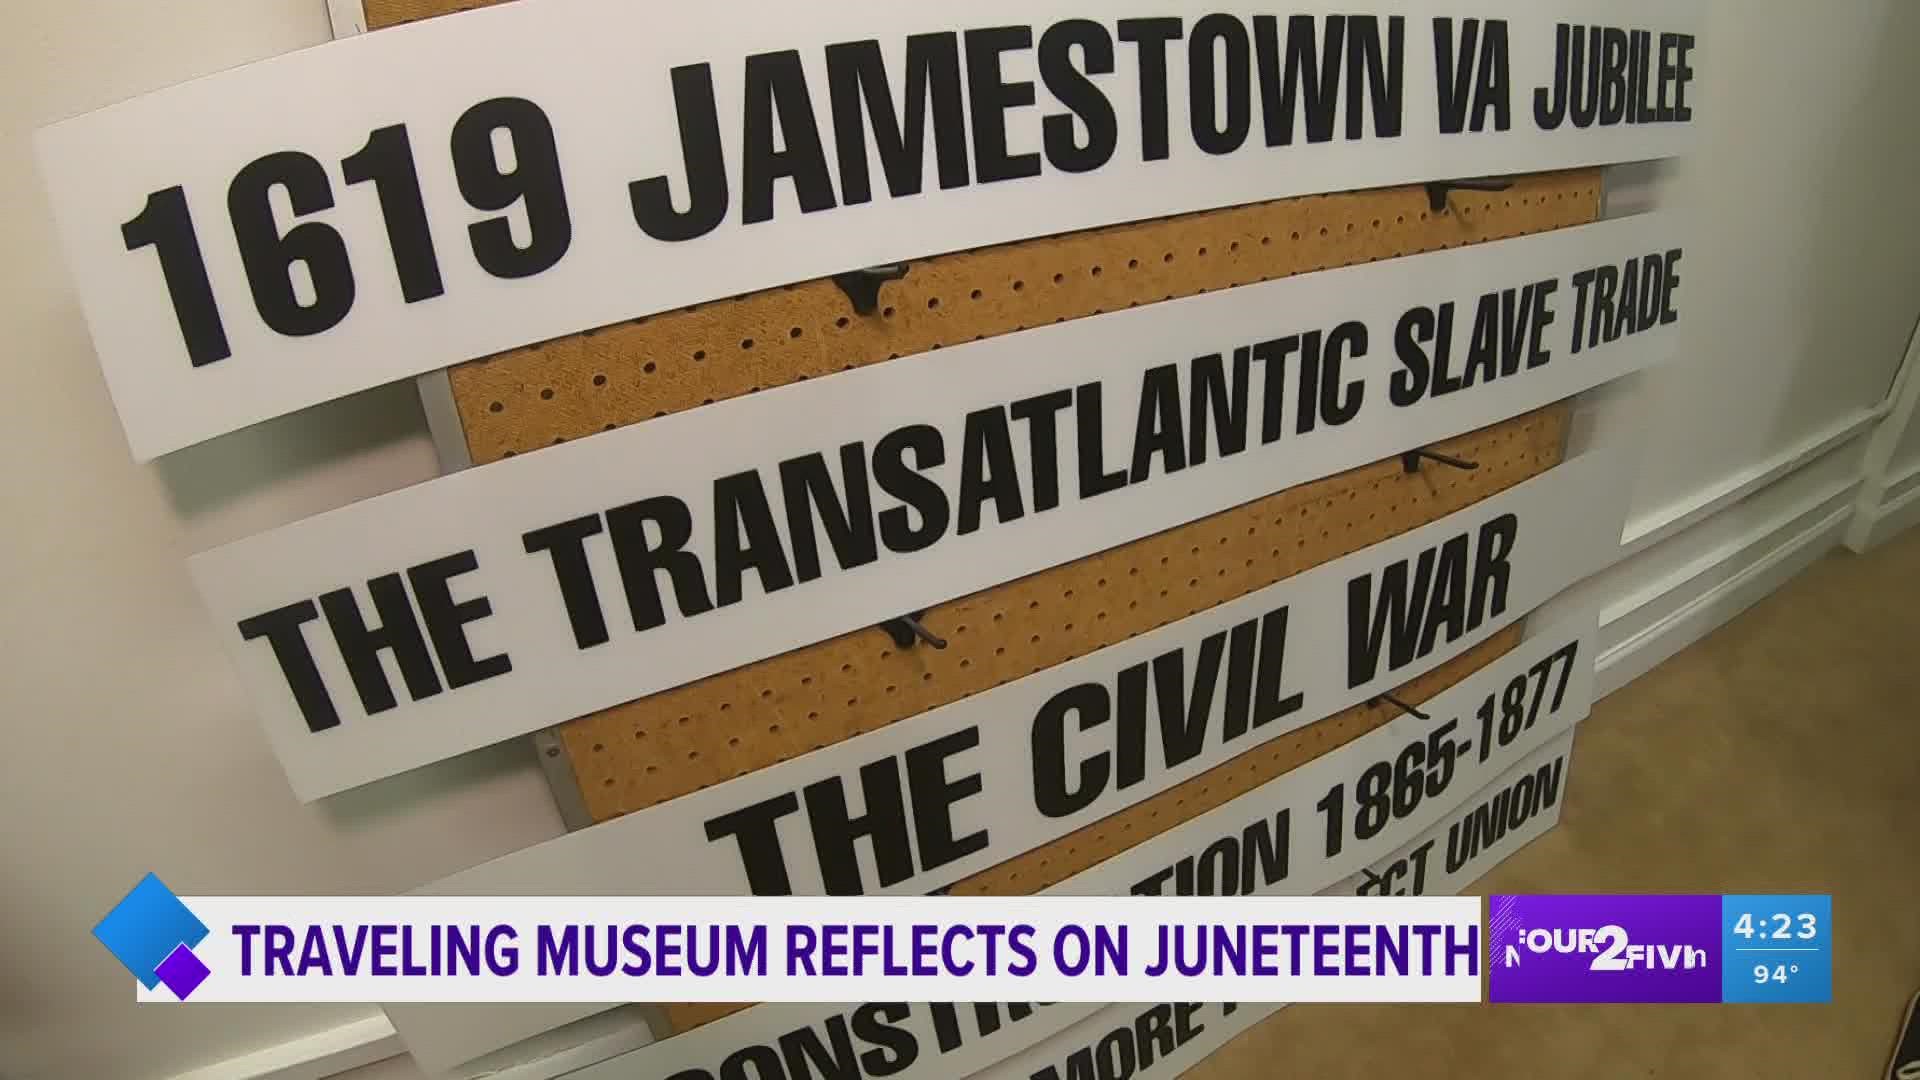 Americans will observe Juneteenth on Sunday, June 19.